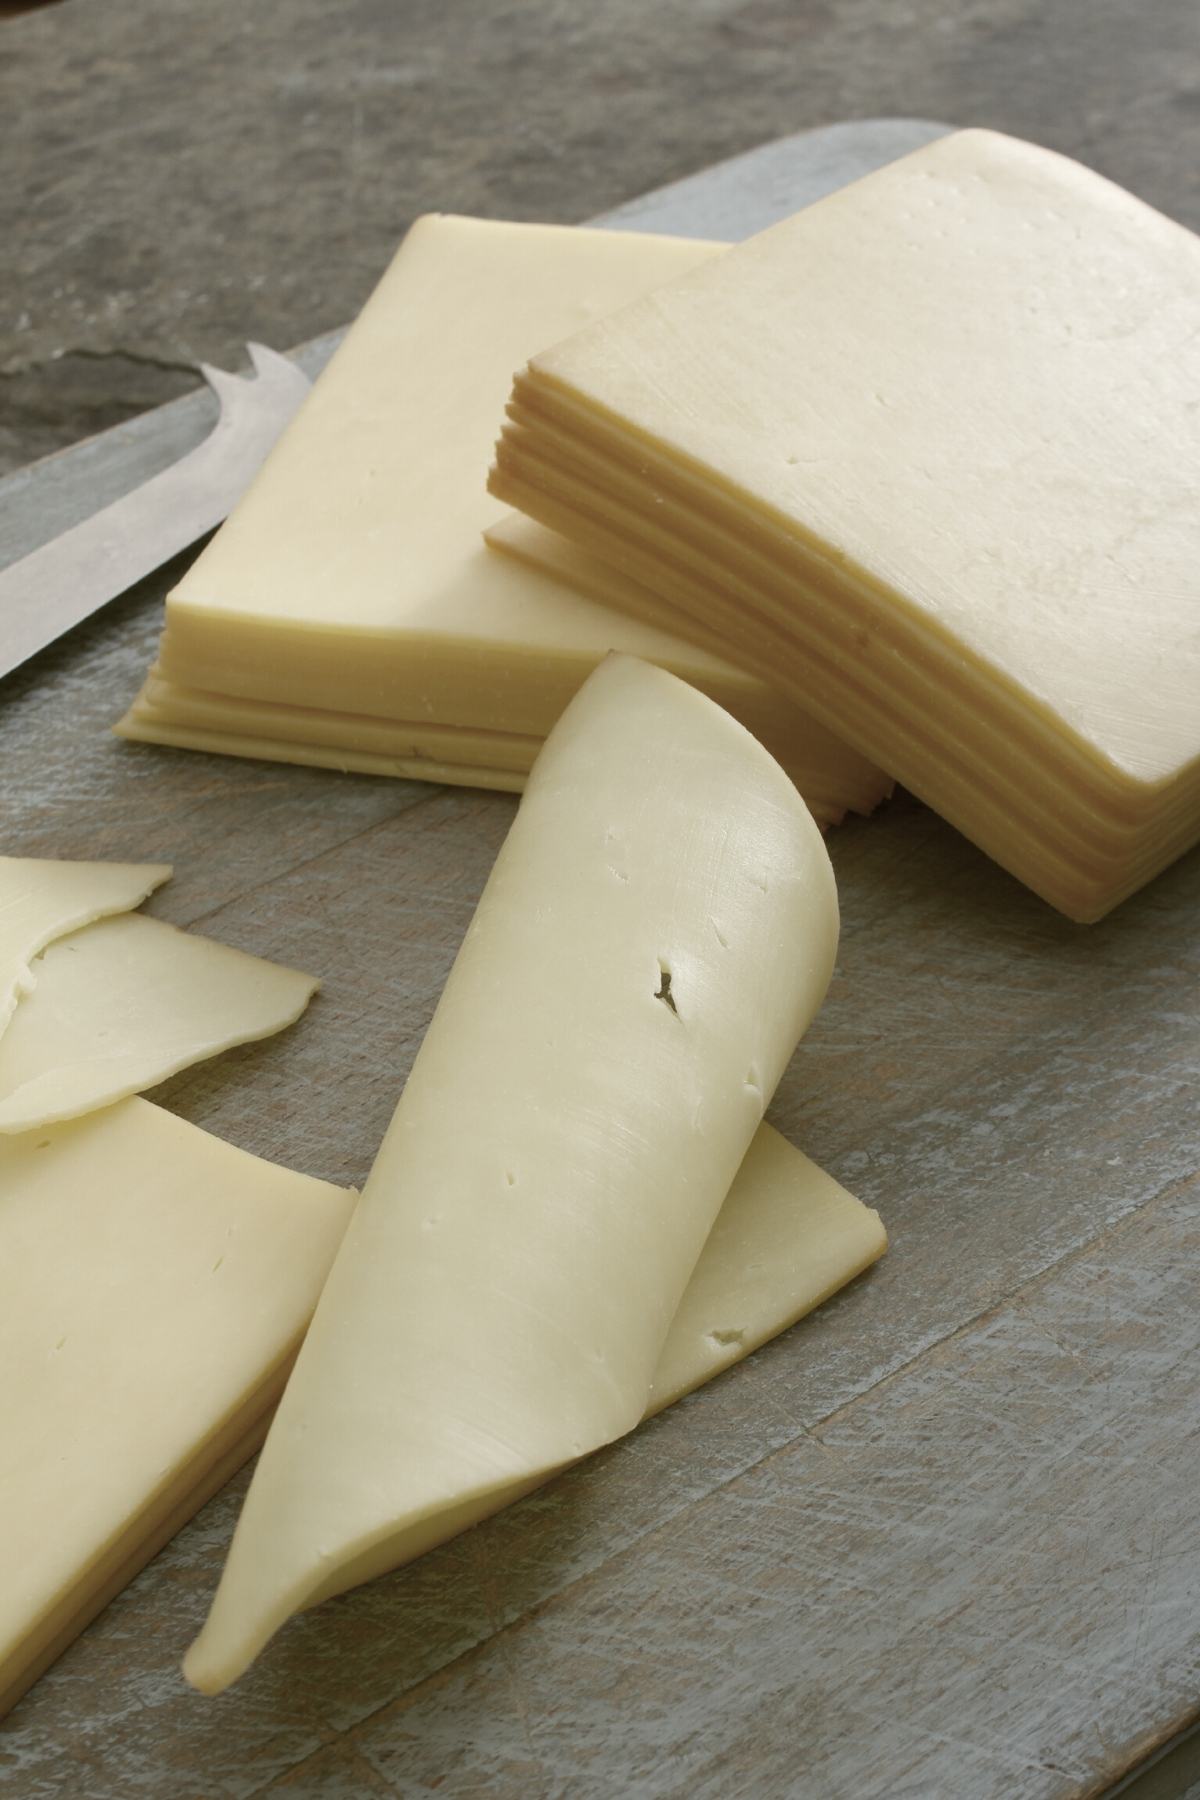 If you love to eat cheese you’ve probably tasted both white and yellow American cheese. Both are delicious and can be enjoyed on their own, in sandwiches, on charcuterie boards and in cooked dishes.